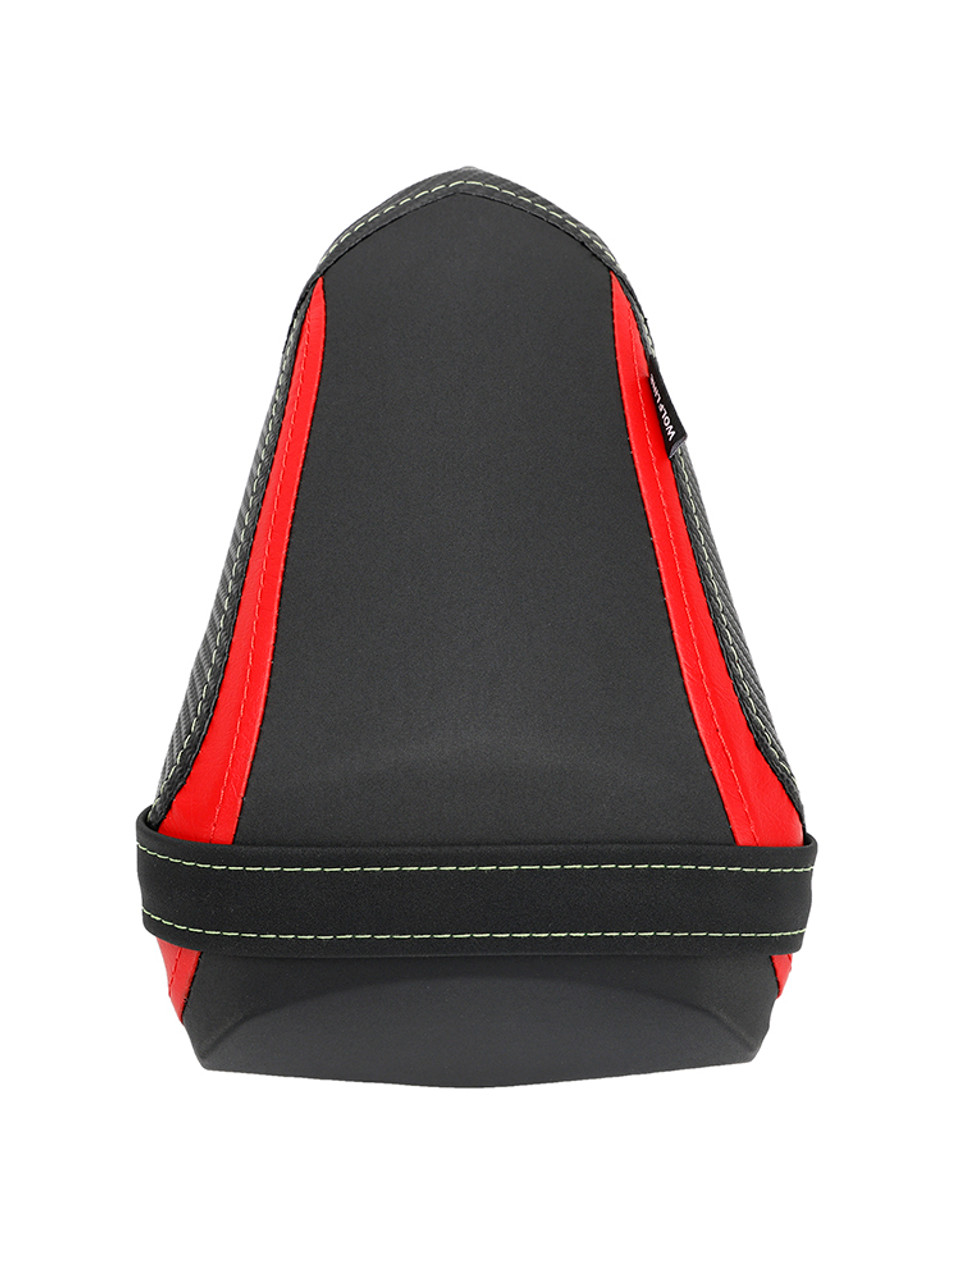 Rear Seat Passenger Cushion Flat Pu Red Fit For Yamaha Yzf-R7 21-22 R1 15-22